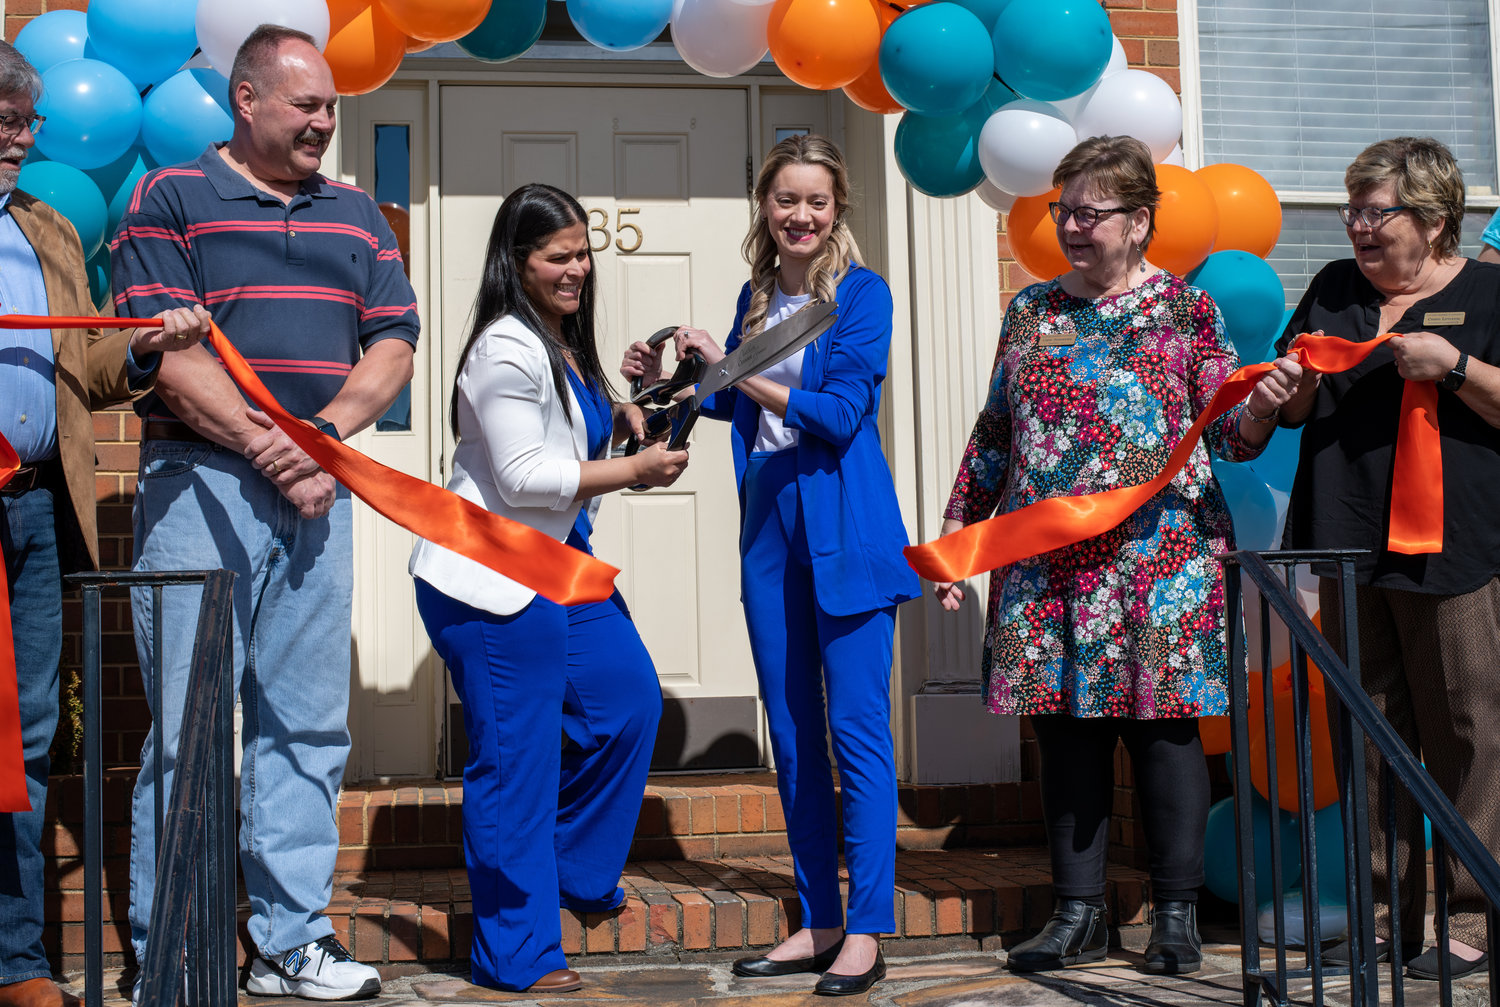 Viva Hydration's grand opening. Owners Lucy Nunnery and Juliana Baca Roman cut the ribbon at the grand opening event for Viva Hydration Saturday in downtown Siler City. Shown, from left, are Siler City Mayor Chip Price, Jay Underwood, Nunnery, Roman, and the Chatham Chamber of Commerce's Cindy Pointdexter and Cherry Littleton.